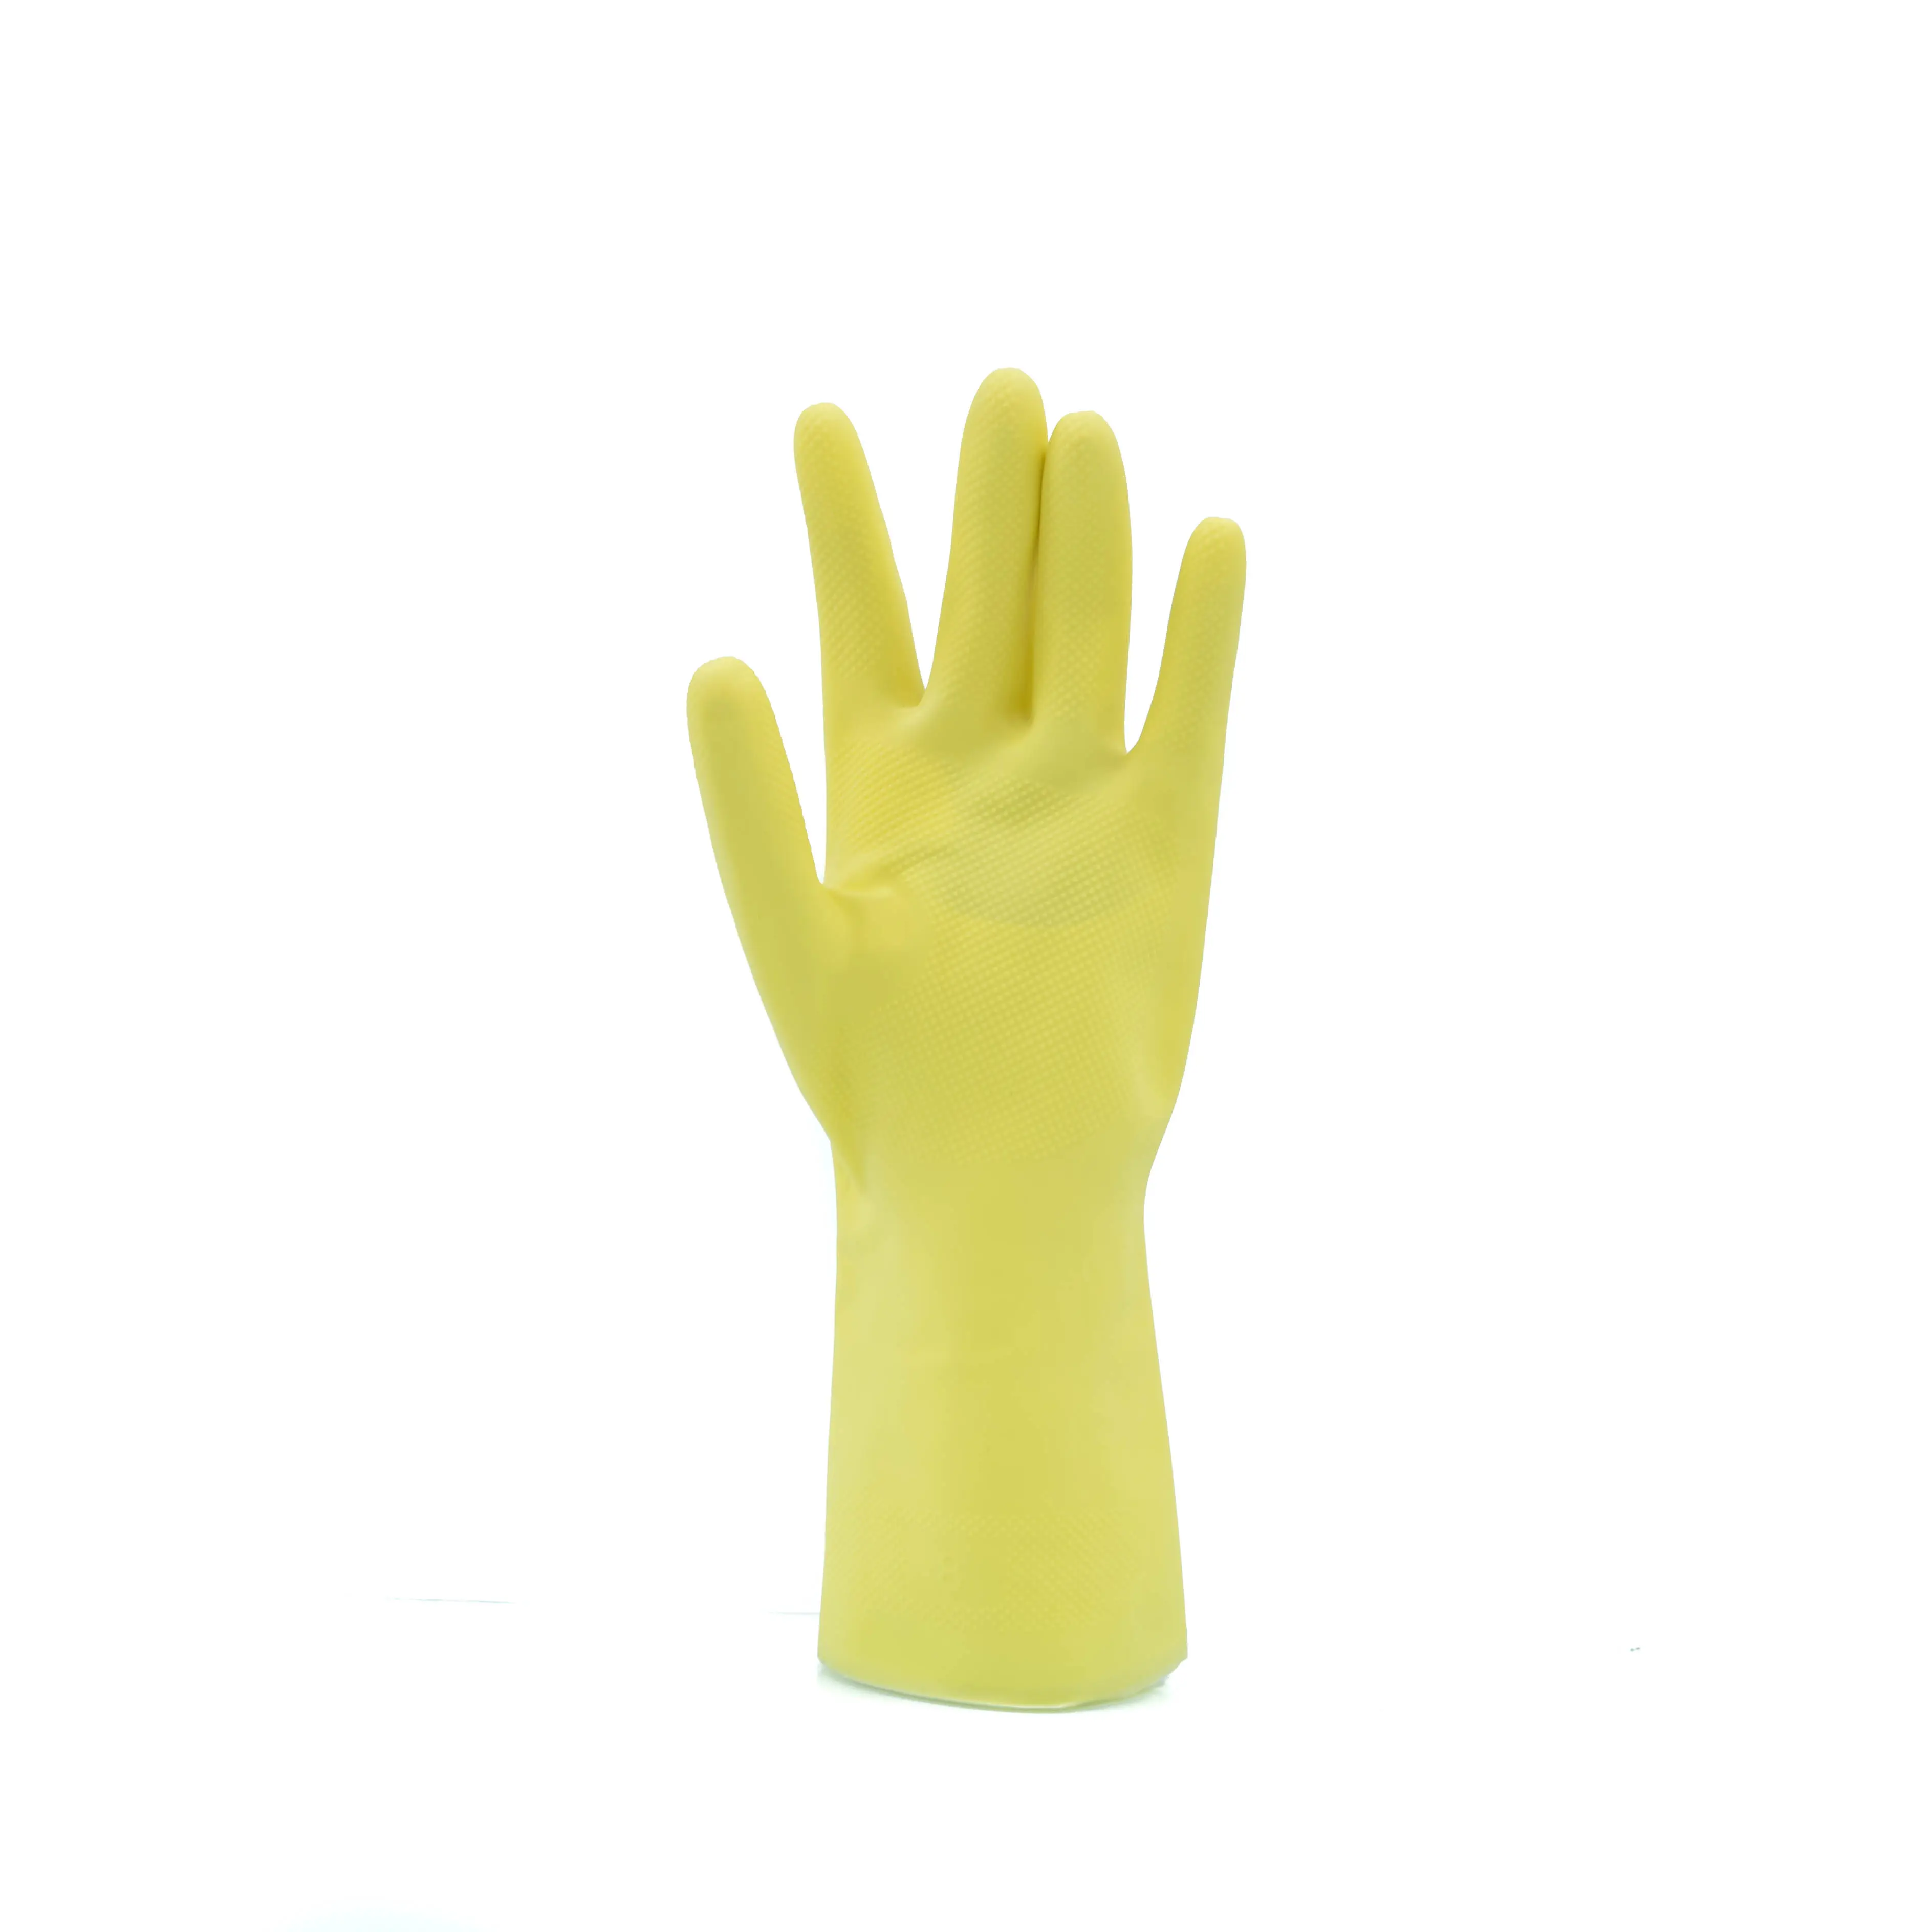 [YFL2] Manufacturer price top quality colorful all purpose home cleaning waterpoof flocklined non-slip reusable rubber gloves